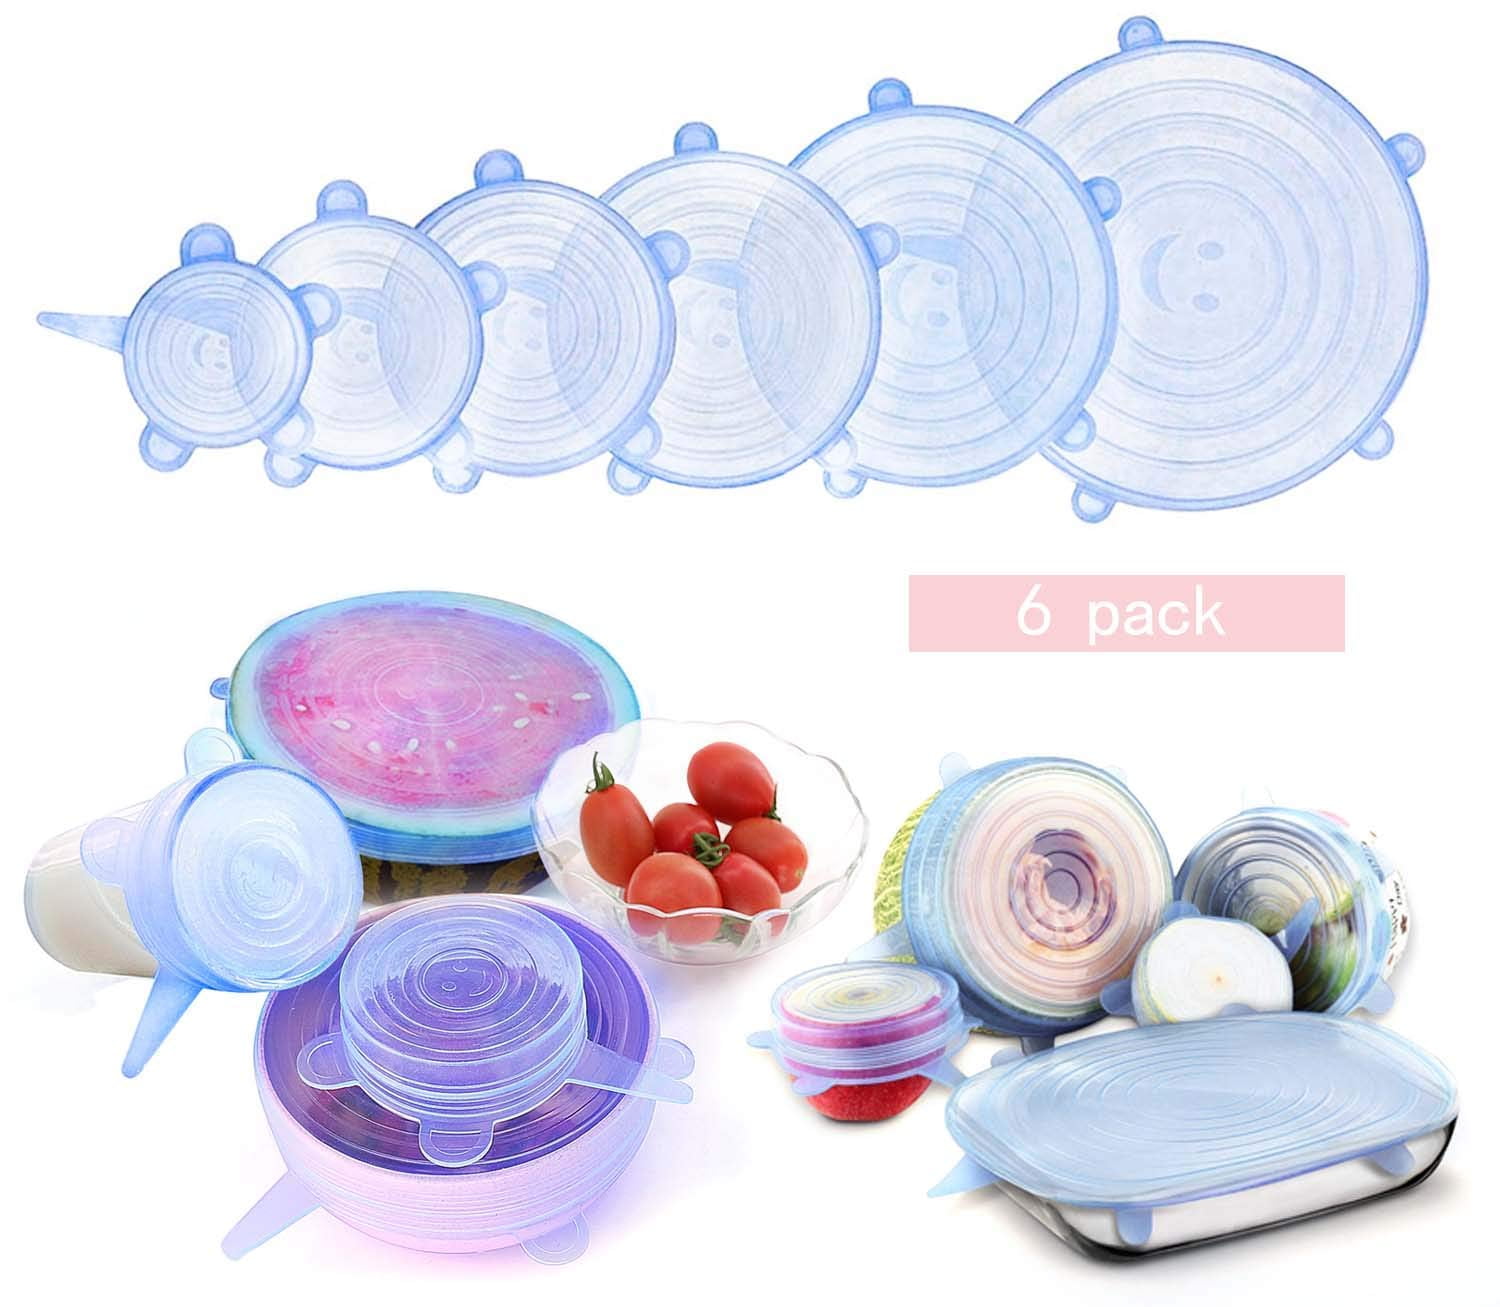 6-Pack Silicone Stretch Lids Food Bowl Covers Storage Microwave Oven  Dishwasher